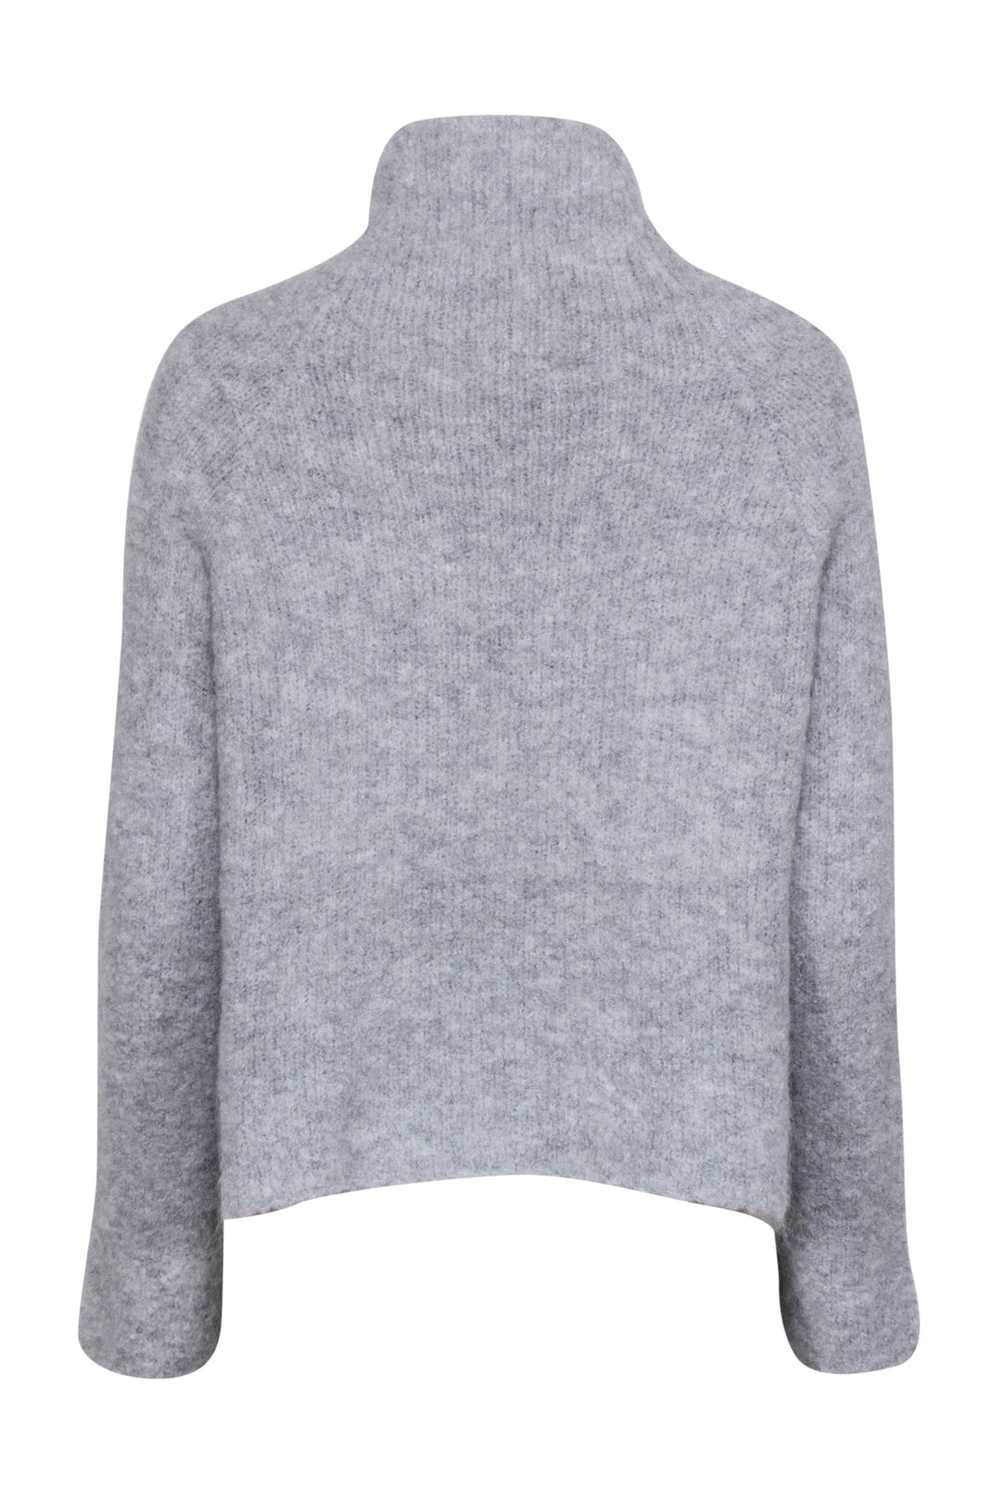 Rebecca Taylor - Grey Mohair Blend Turtle Neck Sw… - image 3